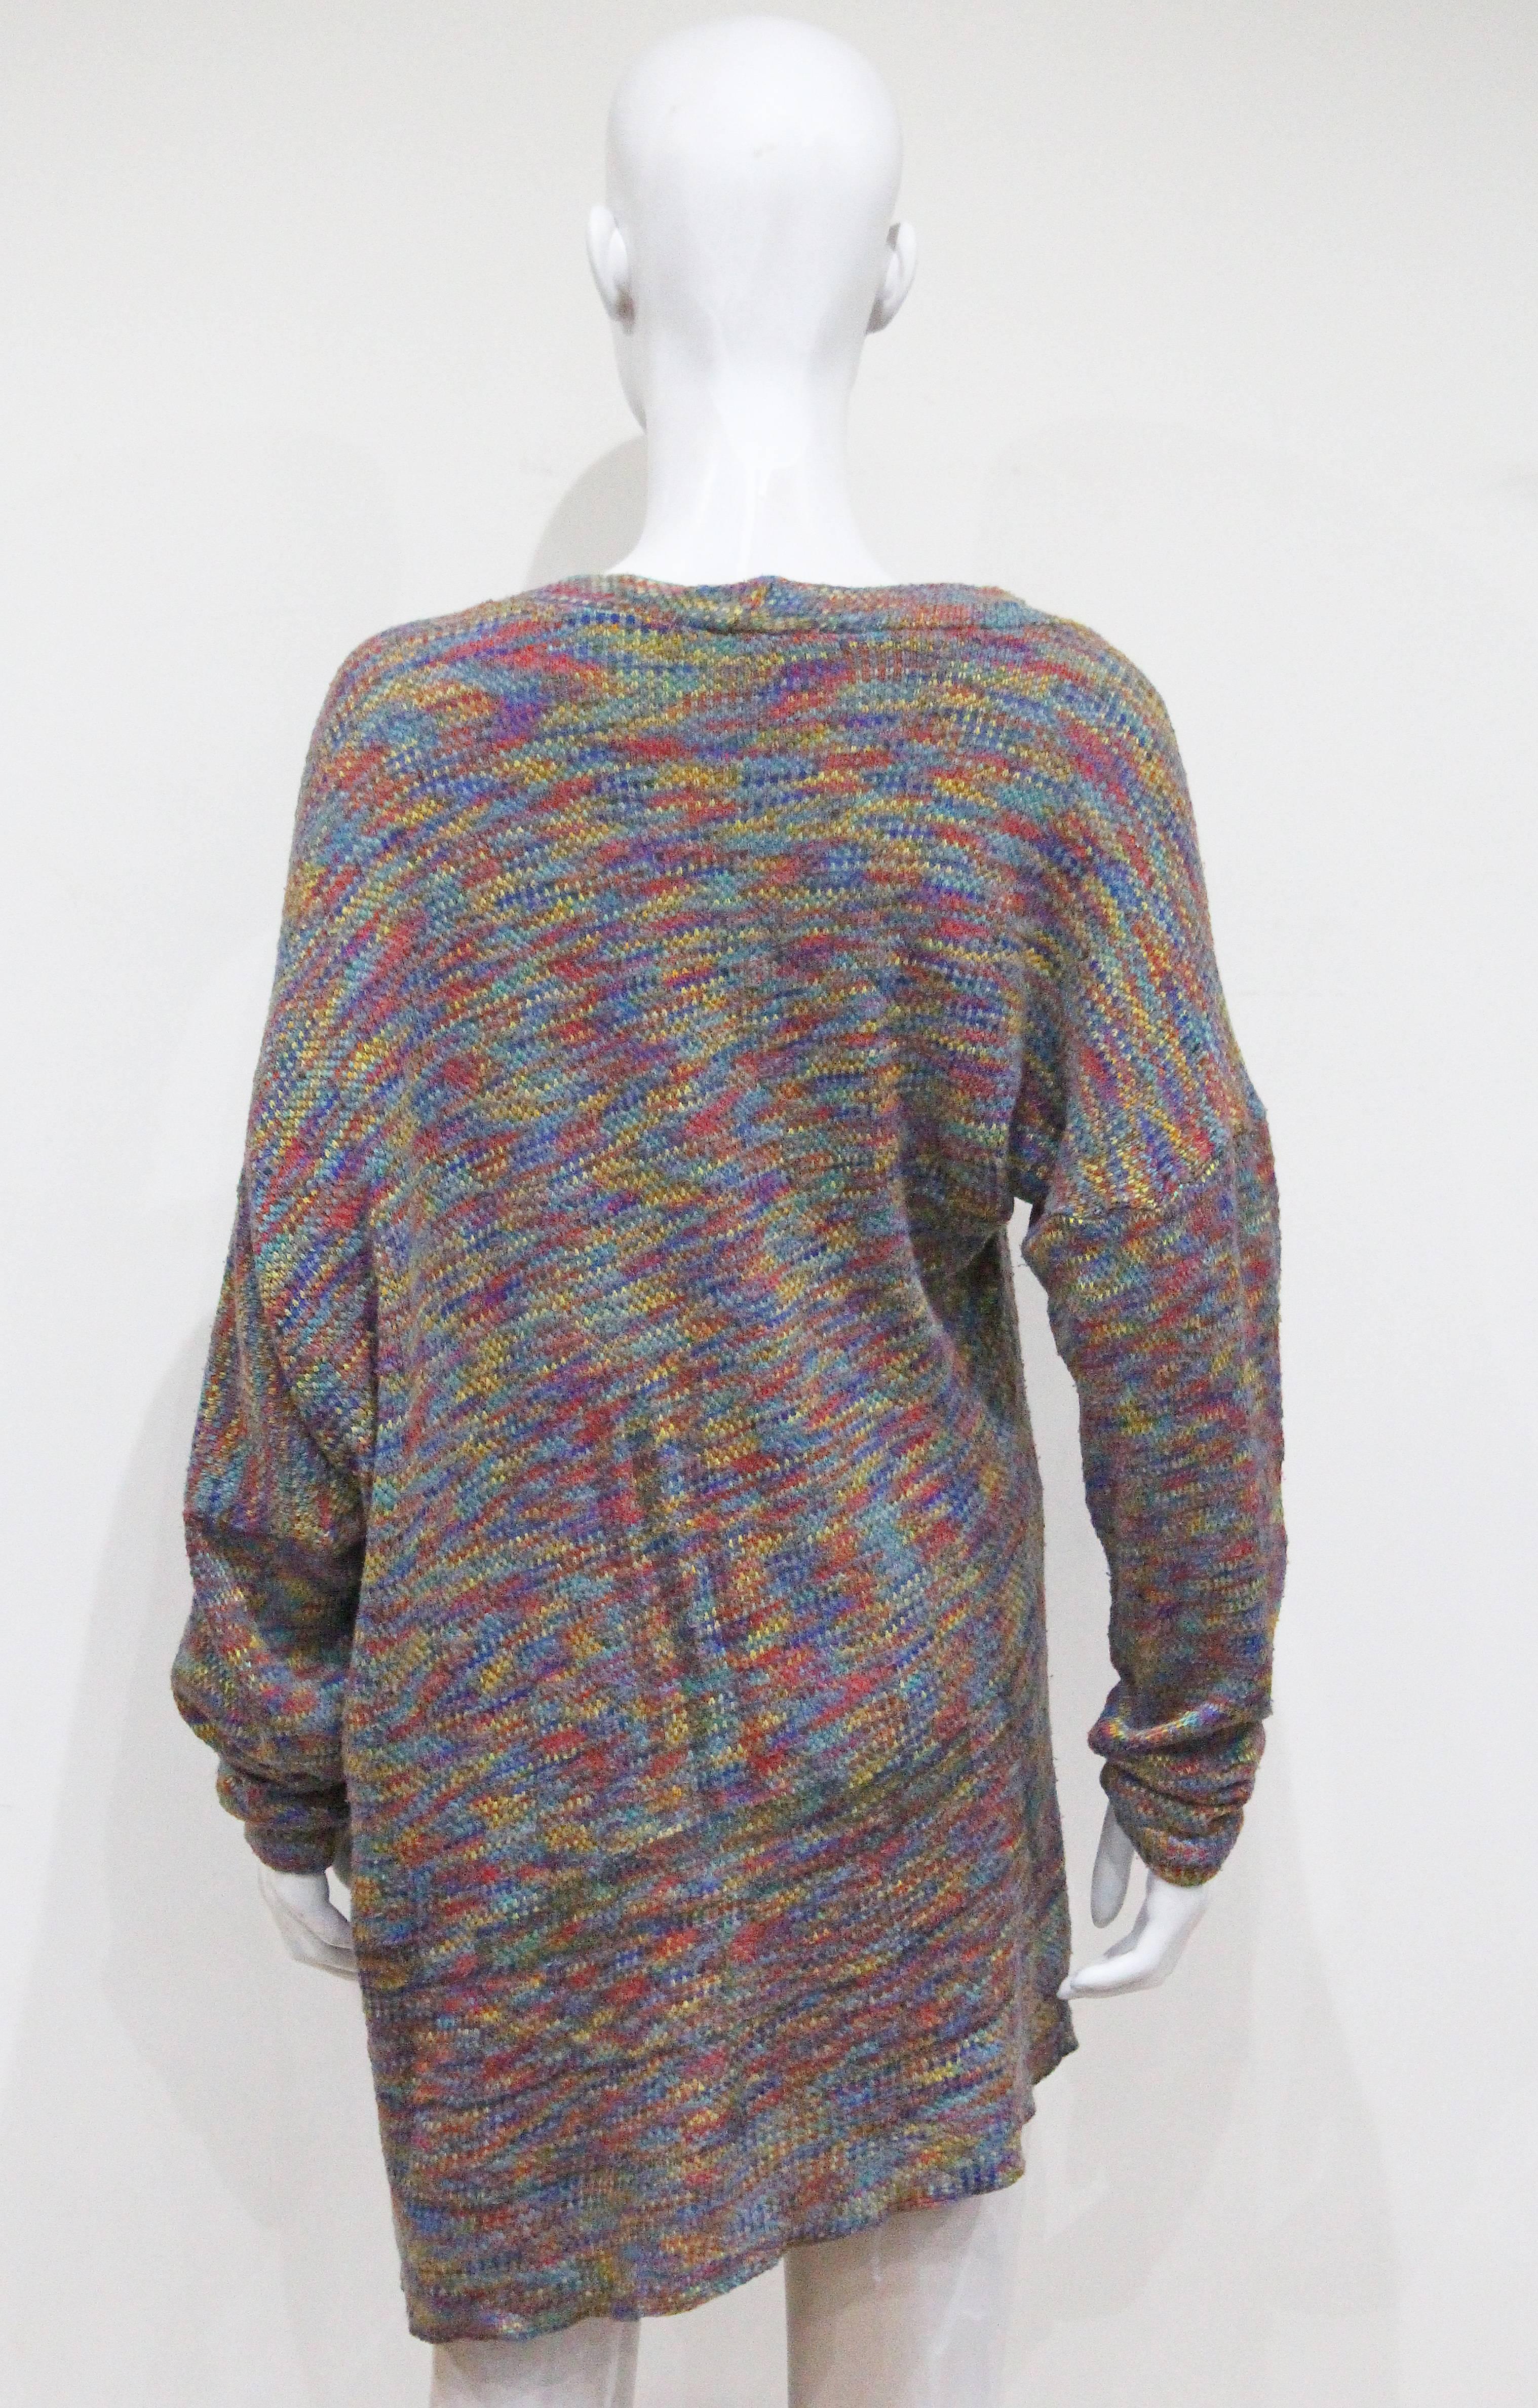 Gray World's End by Vivienne Westwood and Malcolm Mclaren knitted jumper, c. 1982